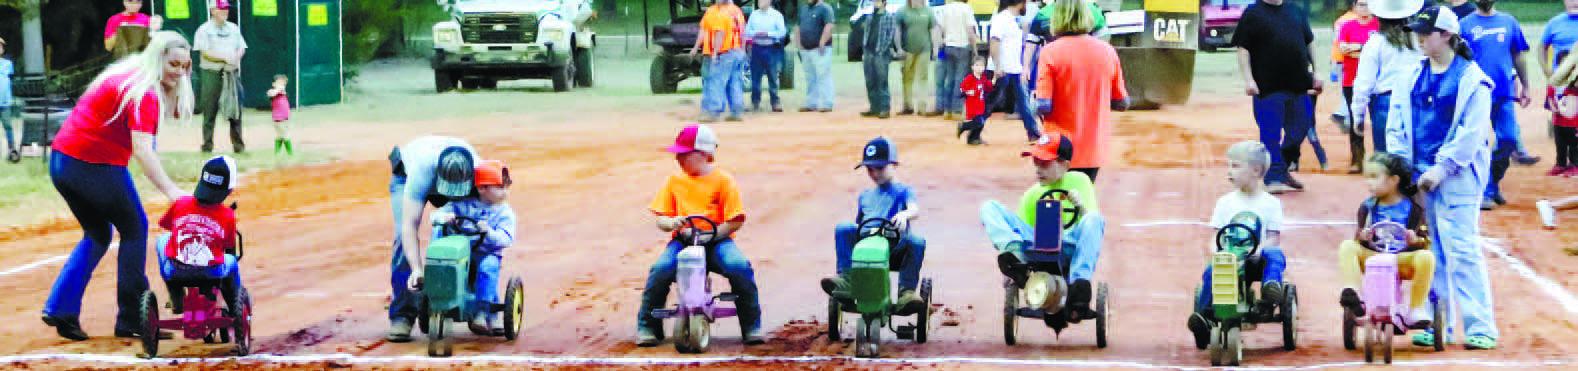 Children get to try their skills at the Kids Tractor Pedal races.